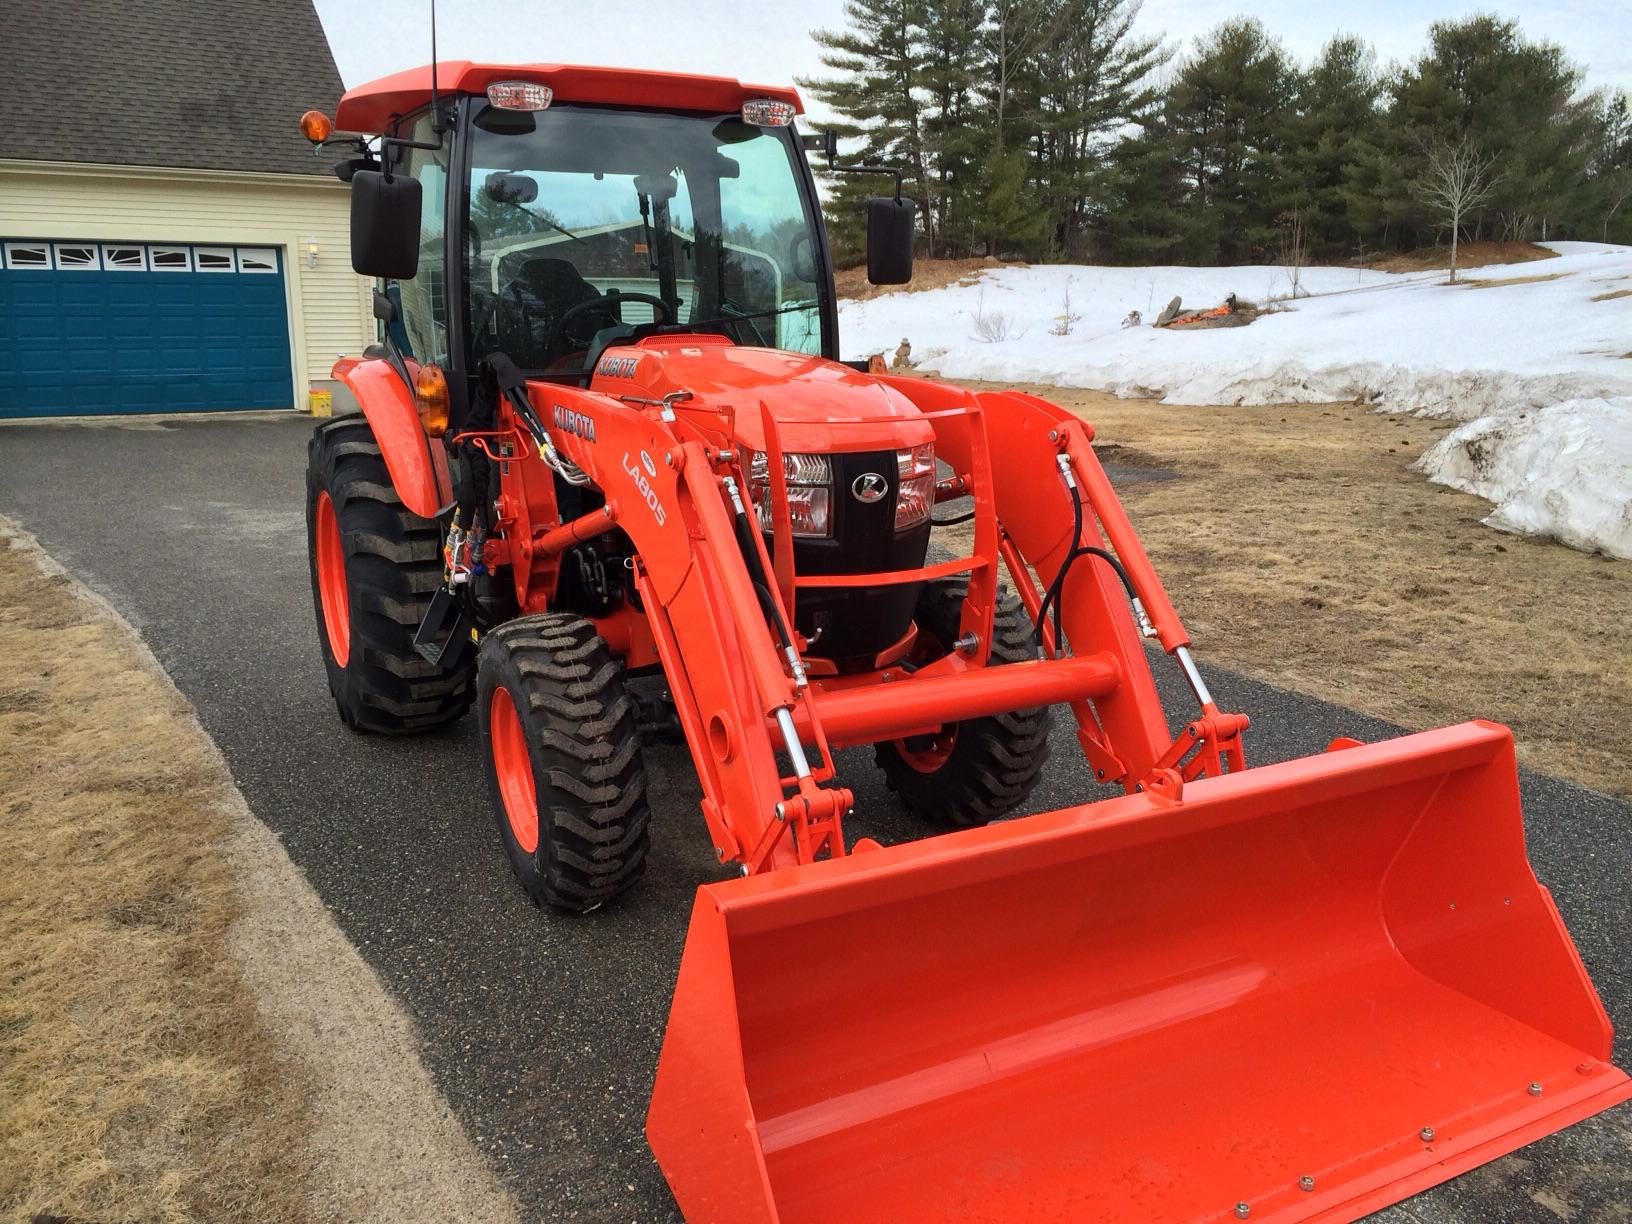 Kubota L4060 Grand L60 Series Diesel Tractor in the Baltimore and ...